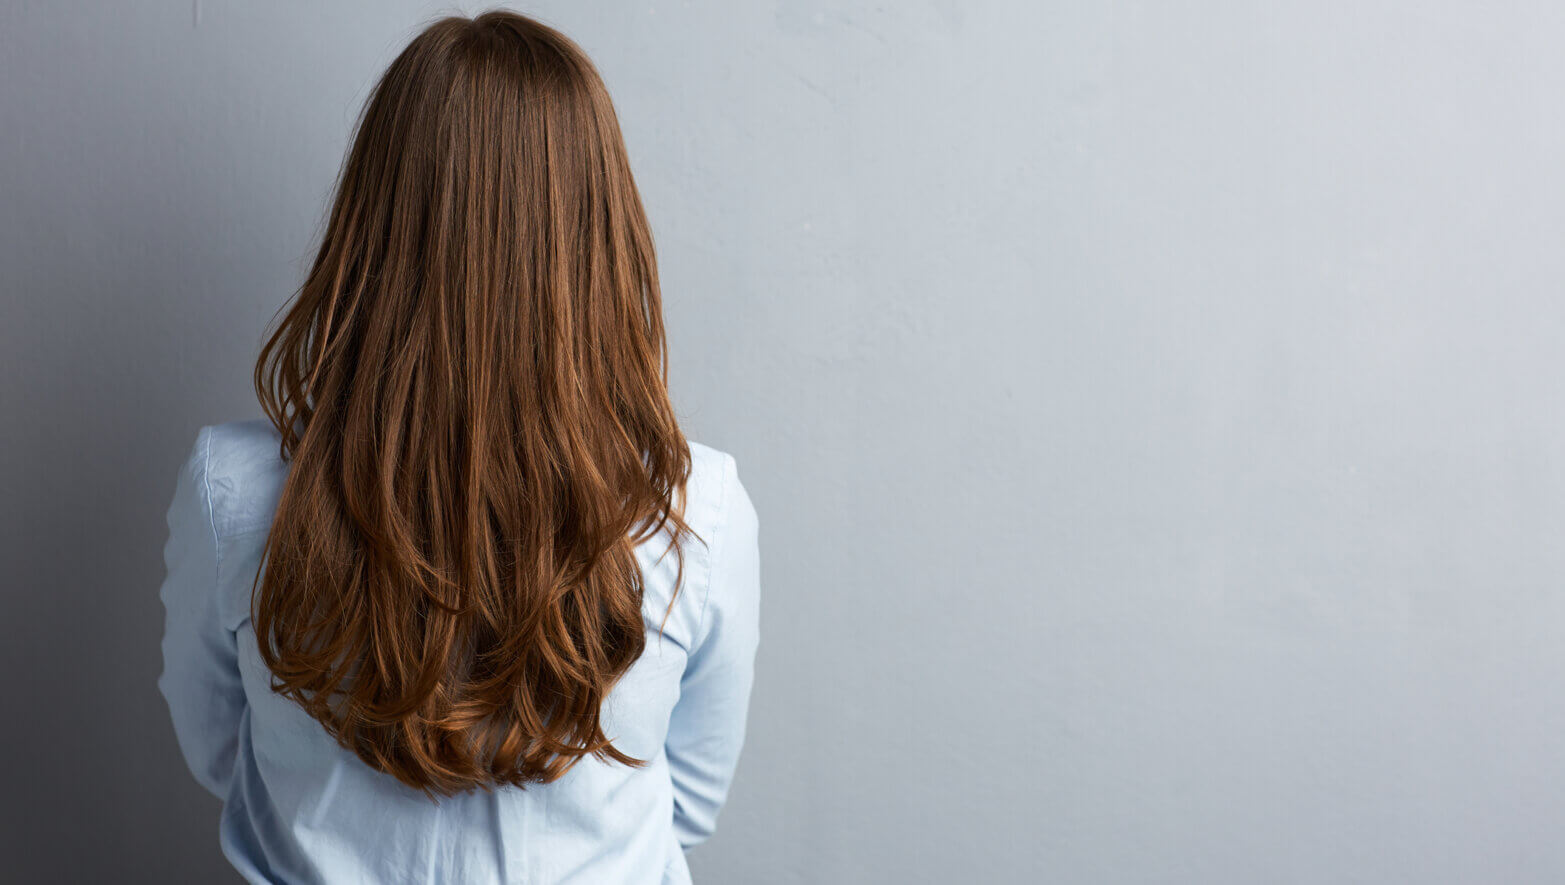 business-woman-standing-back-against-gray-wall-long-hair